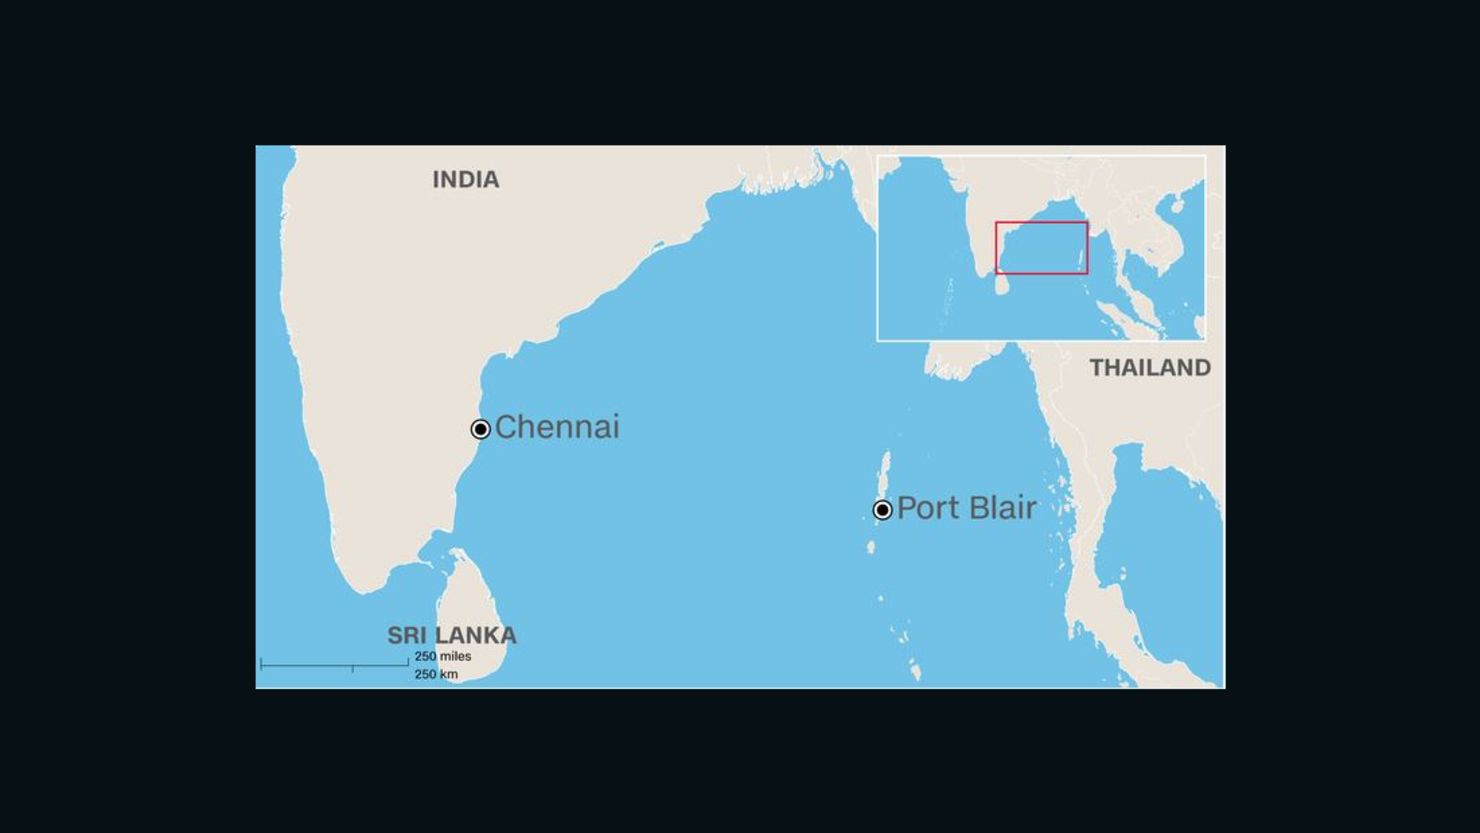 The missing Indian Air Force plane took off from Chennai, India, on the morning of Friday, July 22, 2016, and was scheduled to land at Port Blair.